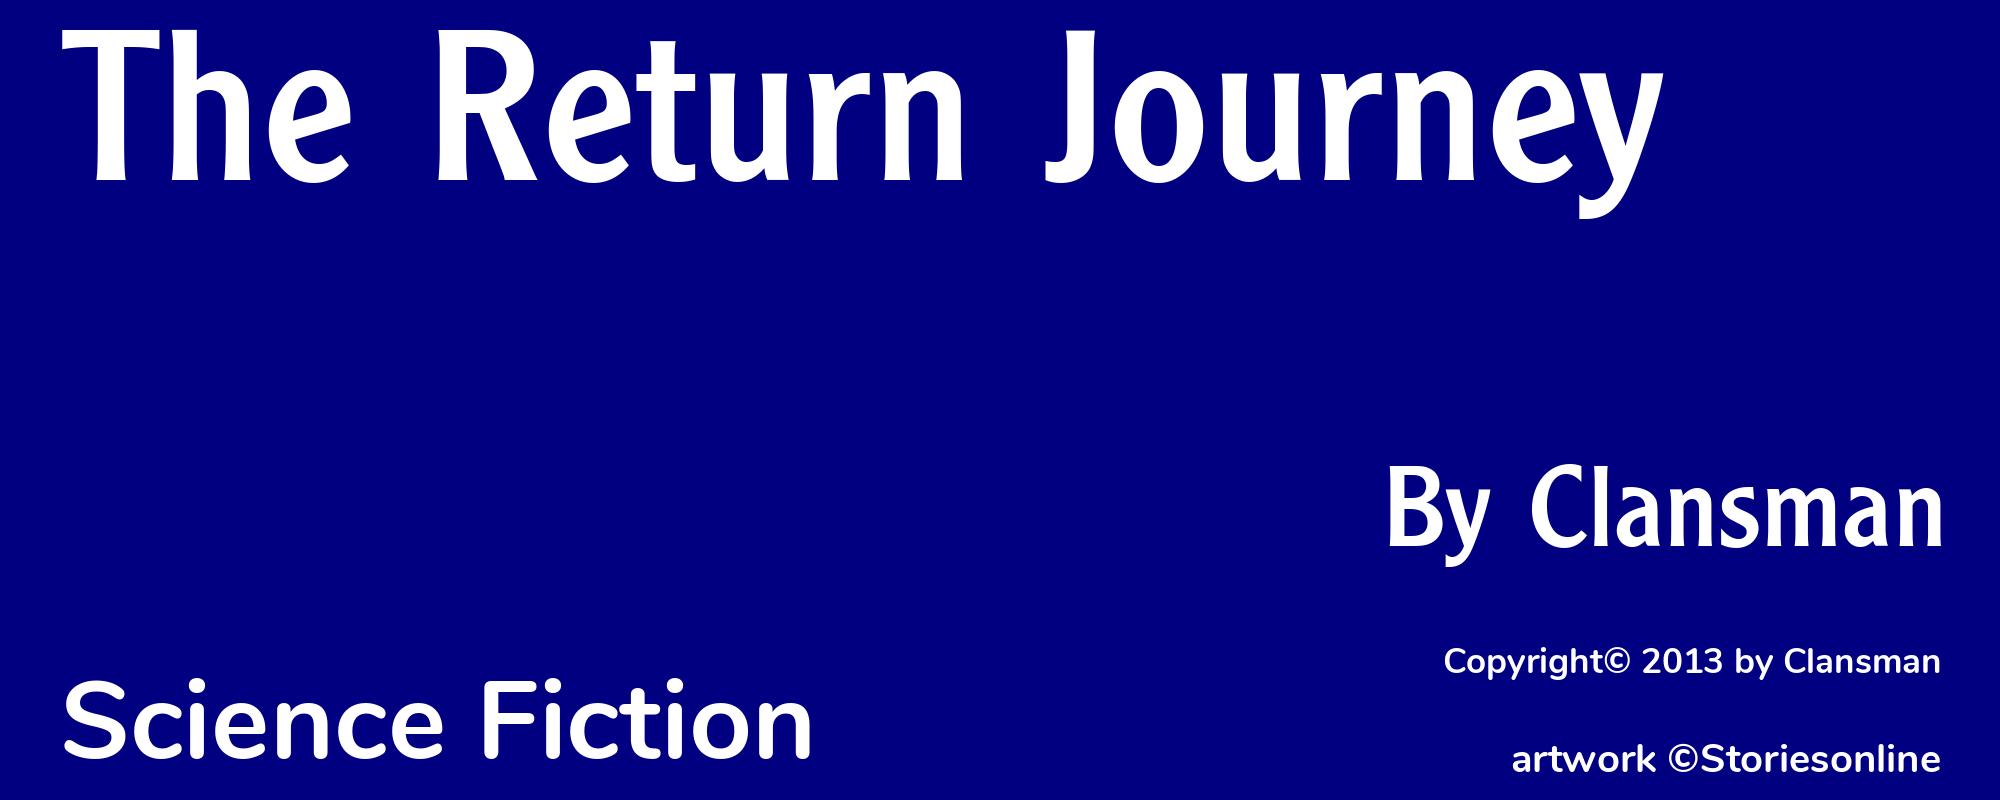 The Return Journey - Cover